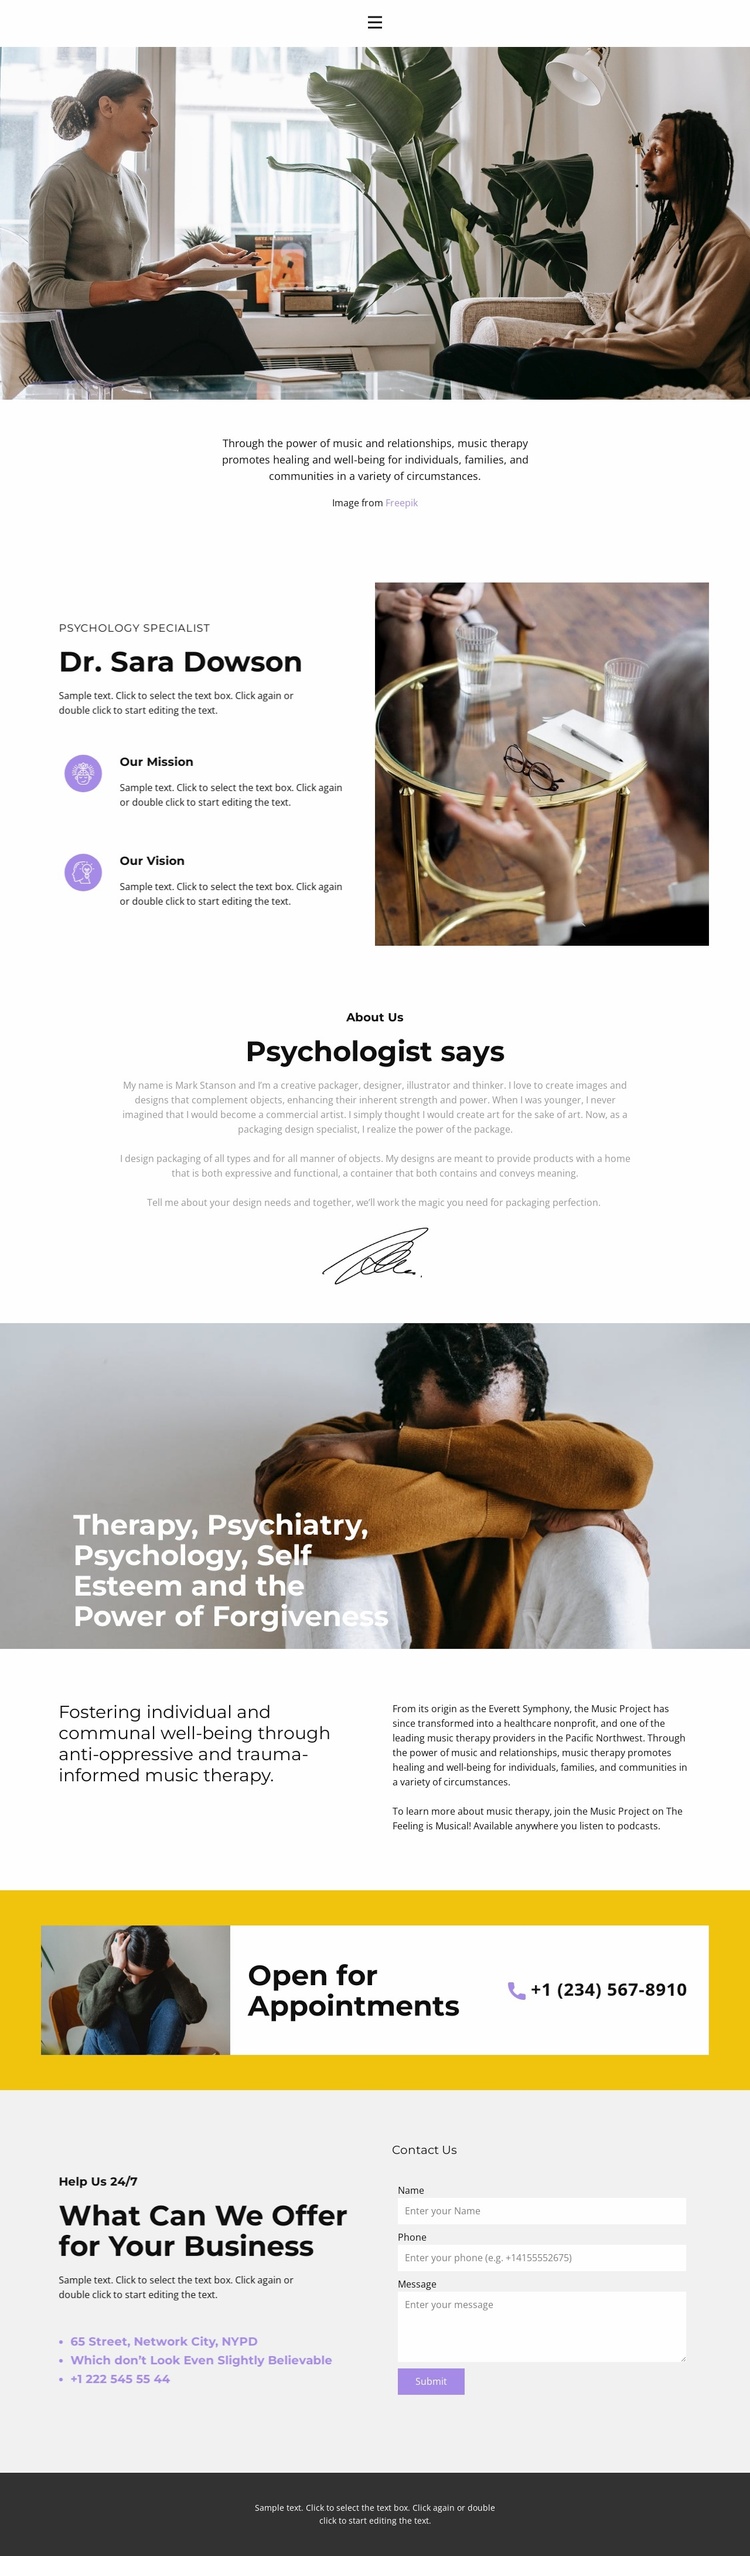 Qualified help from a psychologist Landing Page